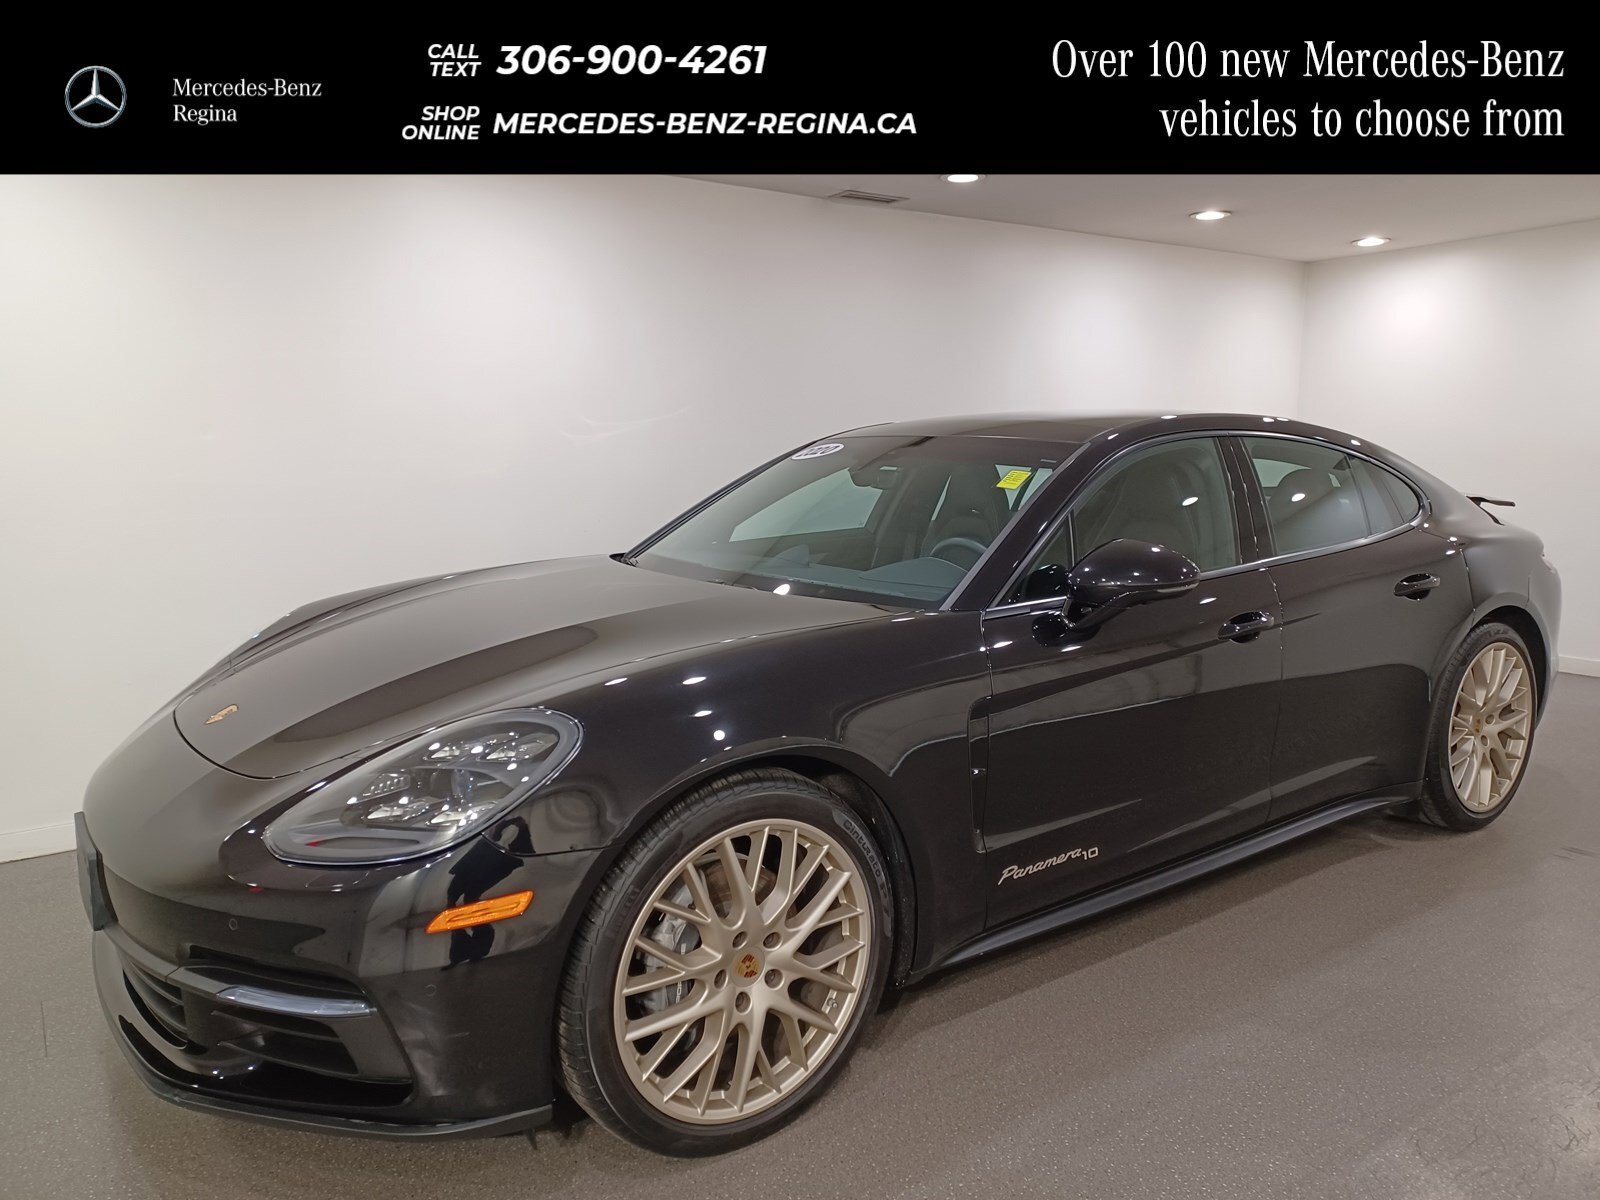 2020 Porsche Panamera 4 10 Years Edition , Heated/Vented Seats, Lane Kee